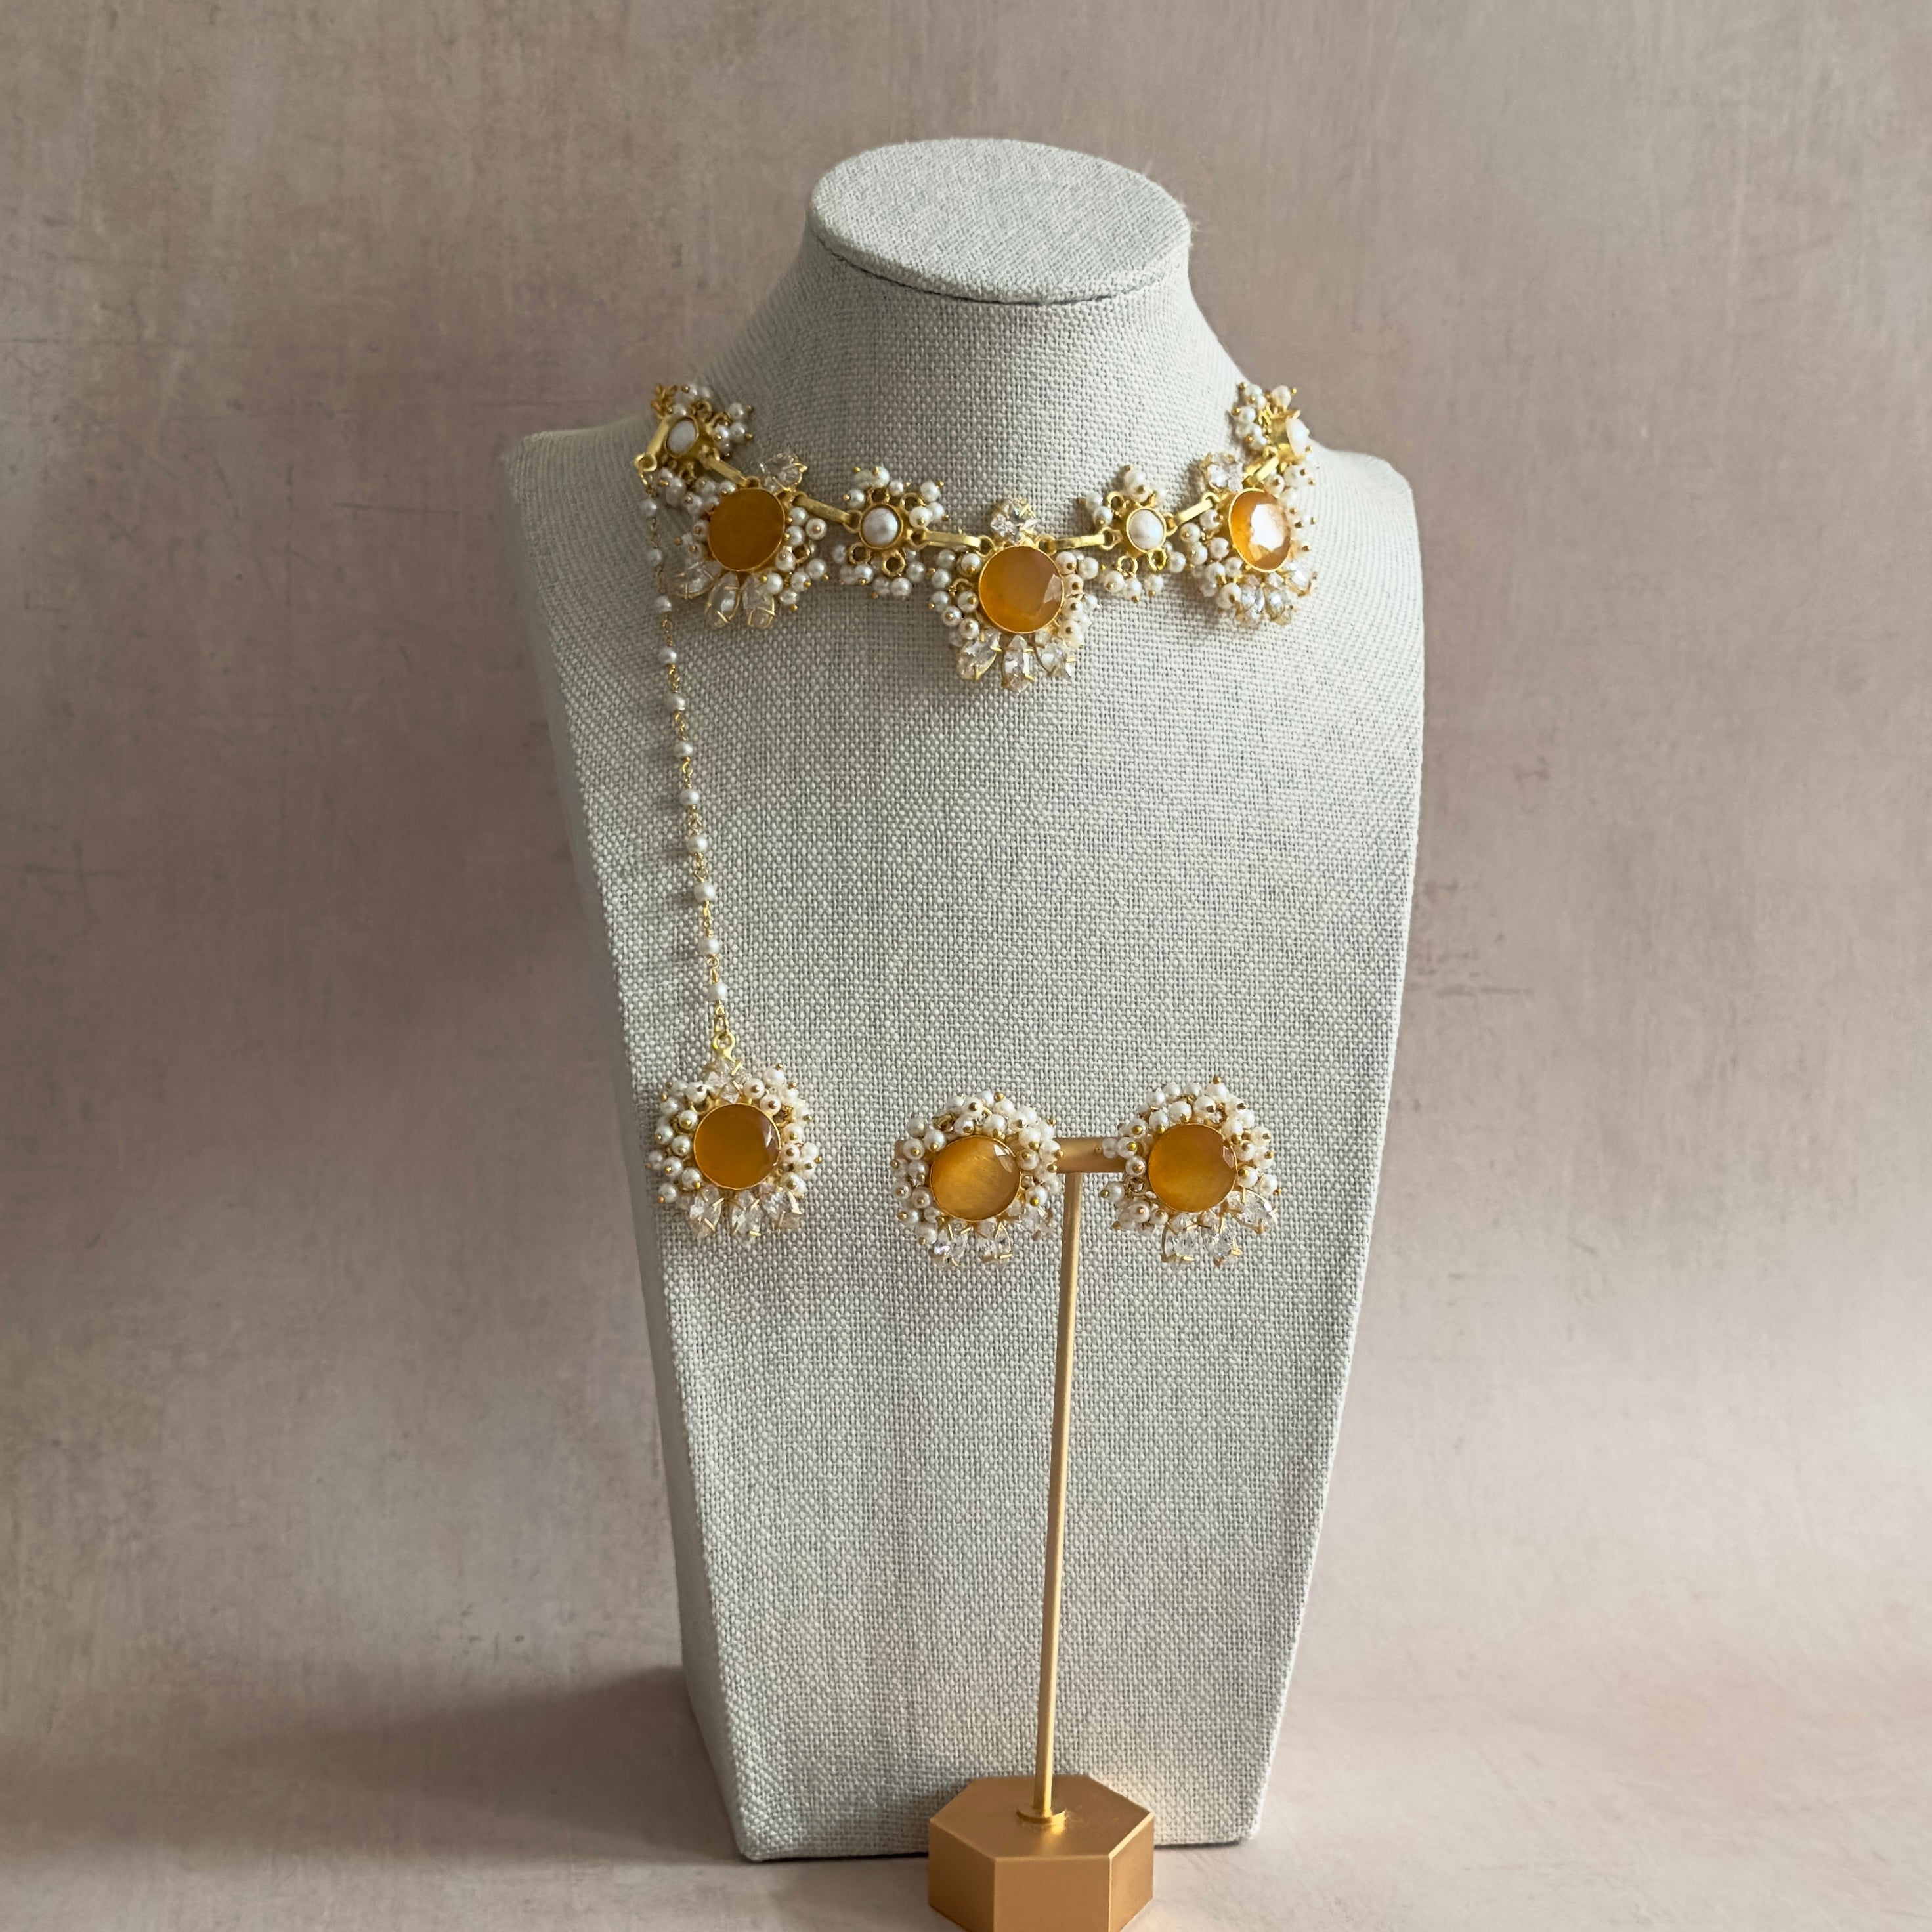 Indulge in the timeless elegance of the Aroz Amber Necklace Set. The stunning amber stones, complemented by the unique shape and texture of freshwater pearls, add a touch of luxury to any outfit. With added sparkle from cubic zirconia, this set is complete with matching earrings and tikka for a truly mesmerizing look.